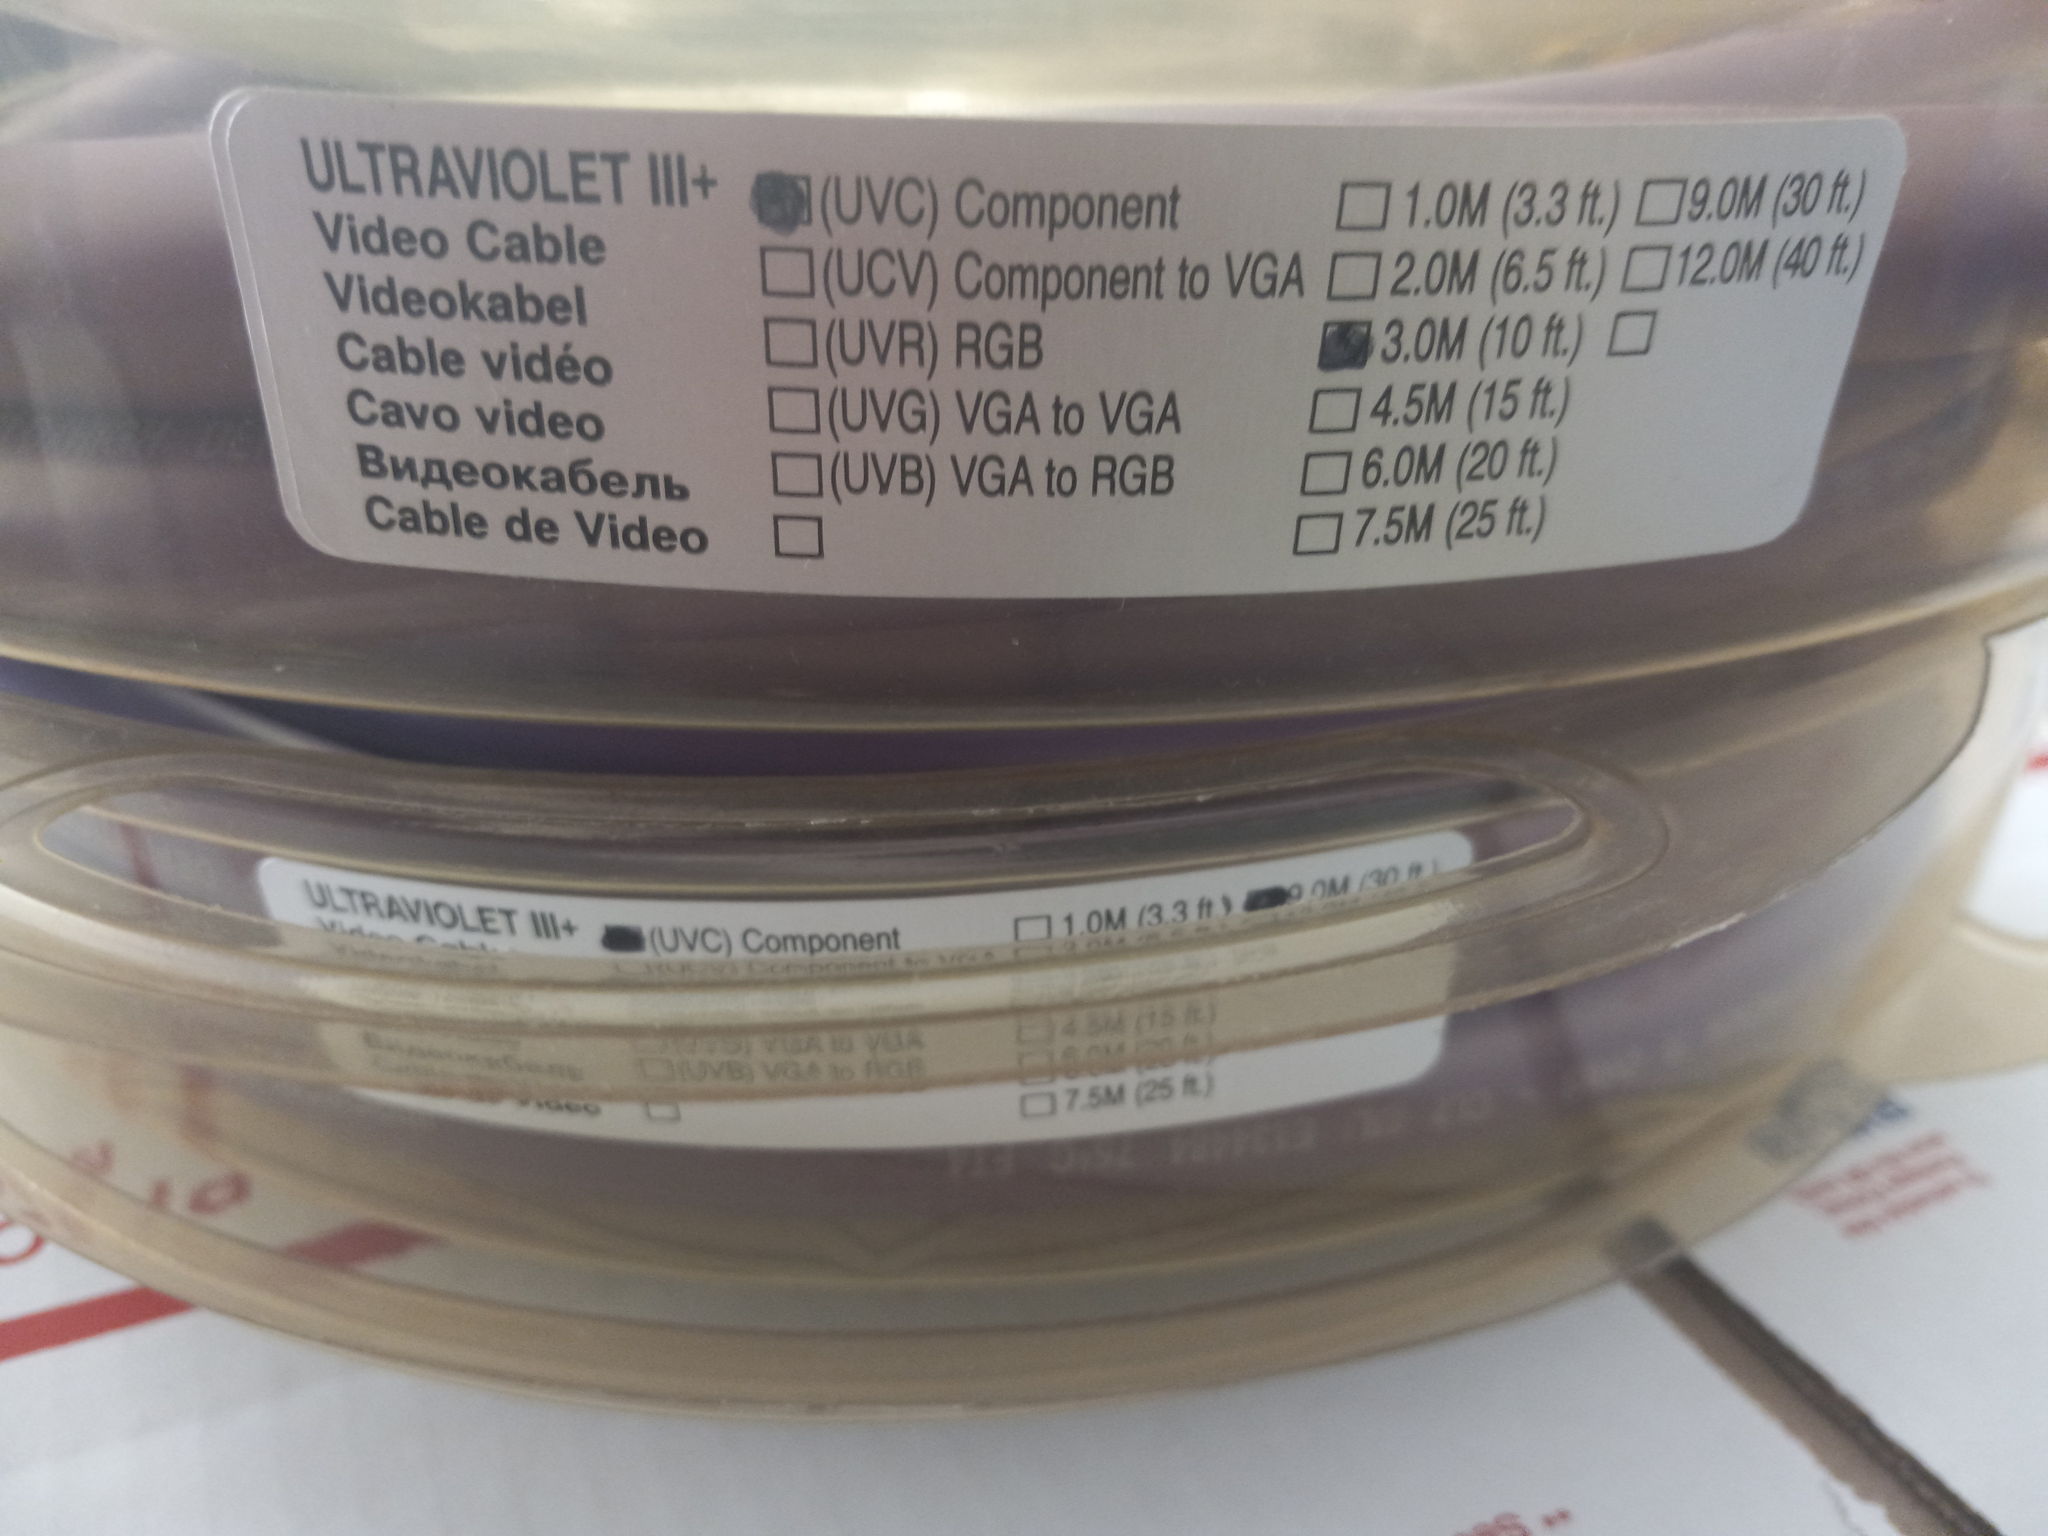 Wireworld ULTRAVIOLET III ultra component video cable, ... 6